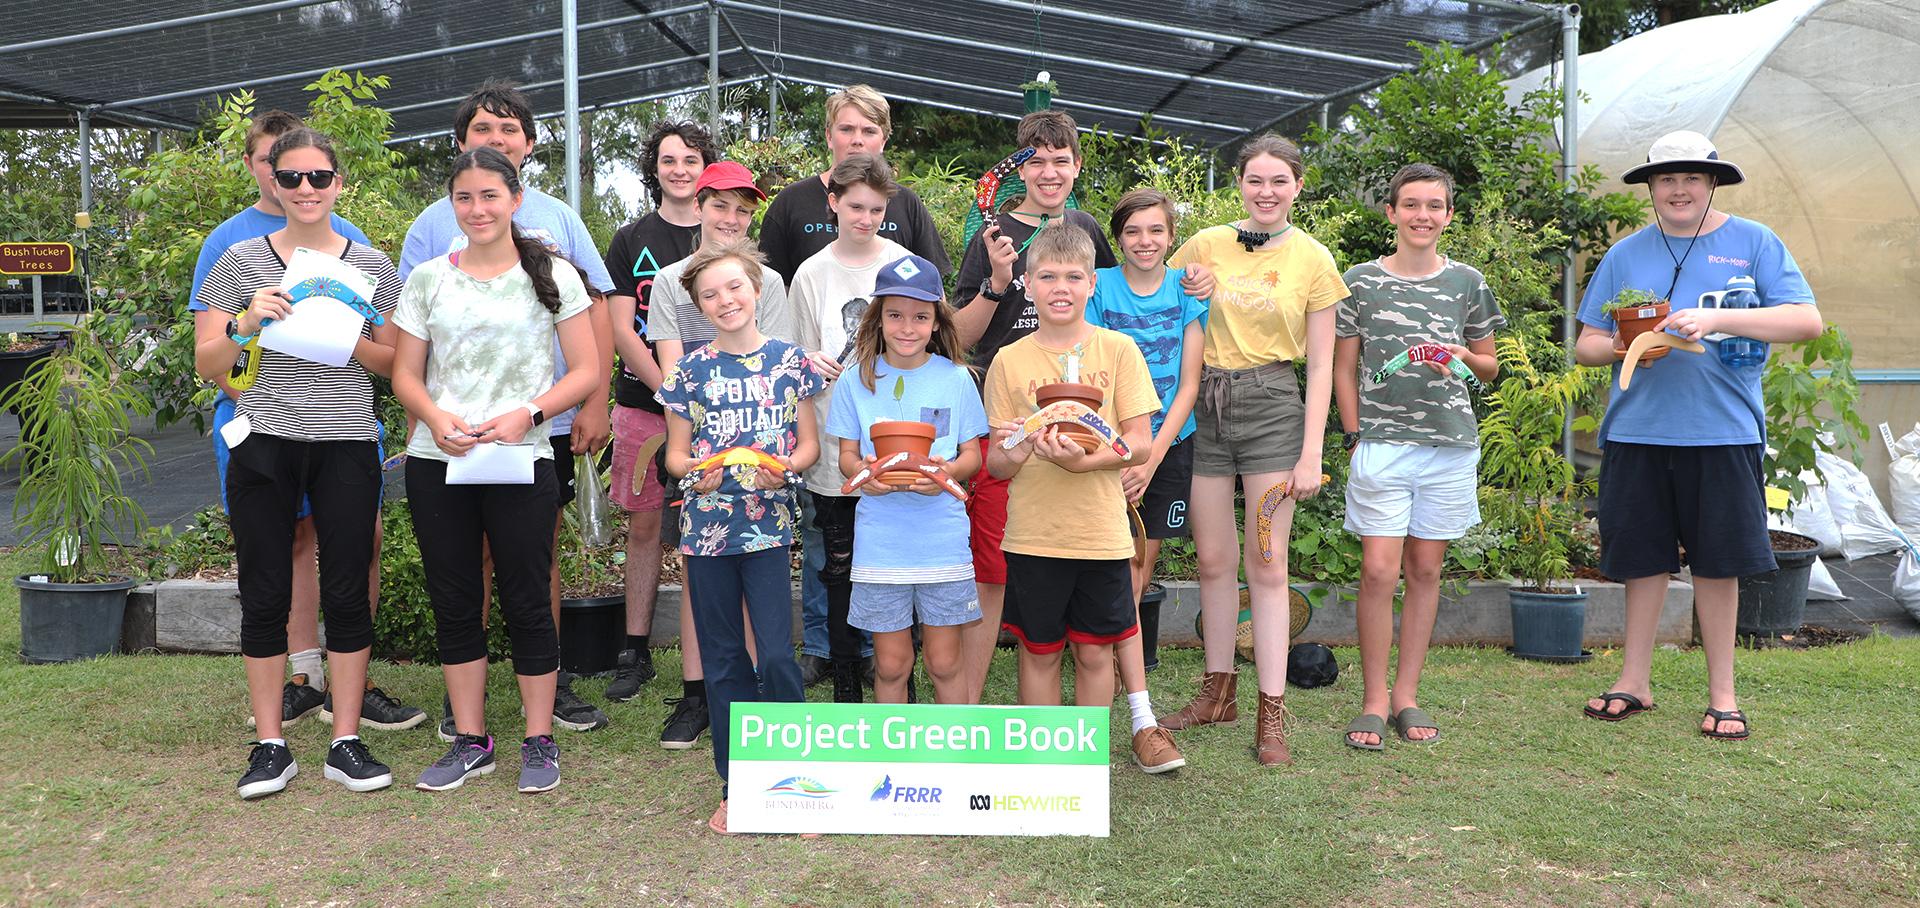 The Green Book project connects youth with the environment.